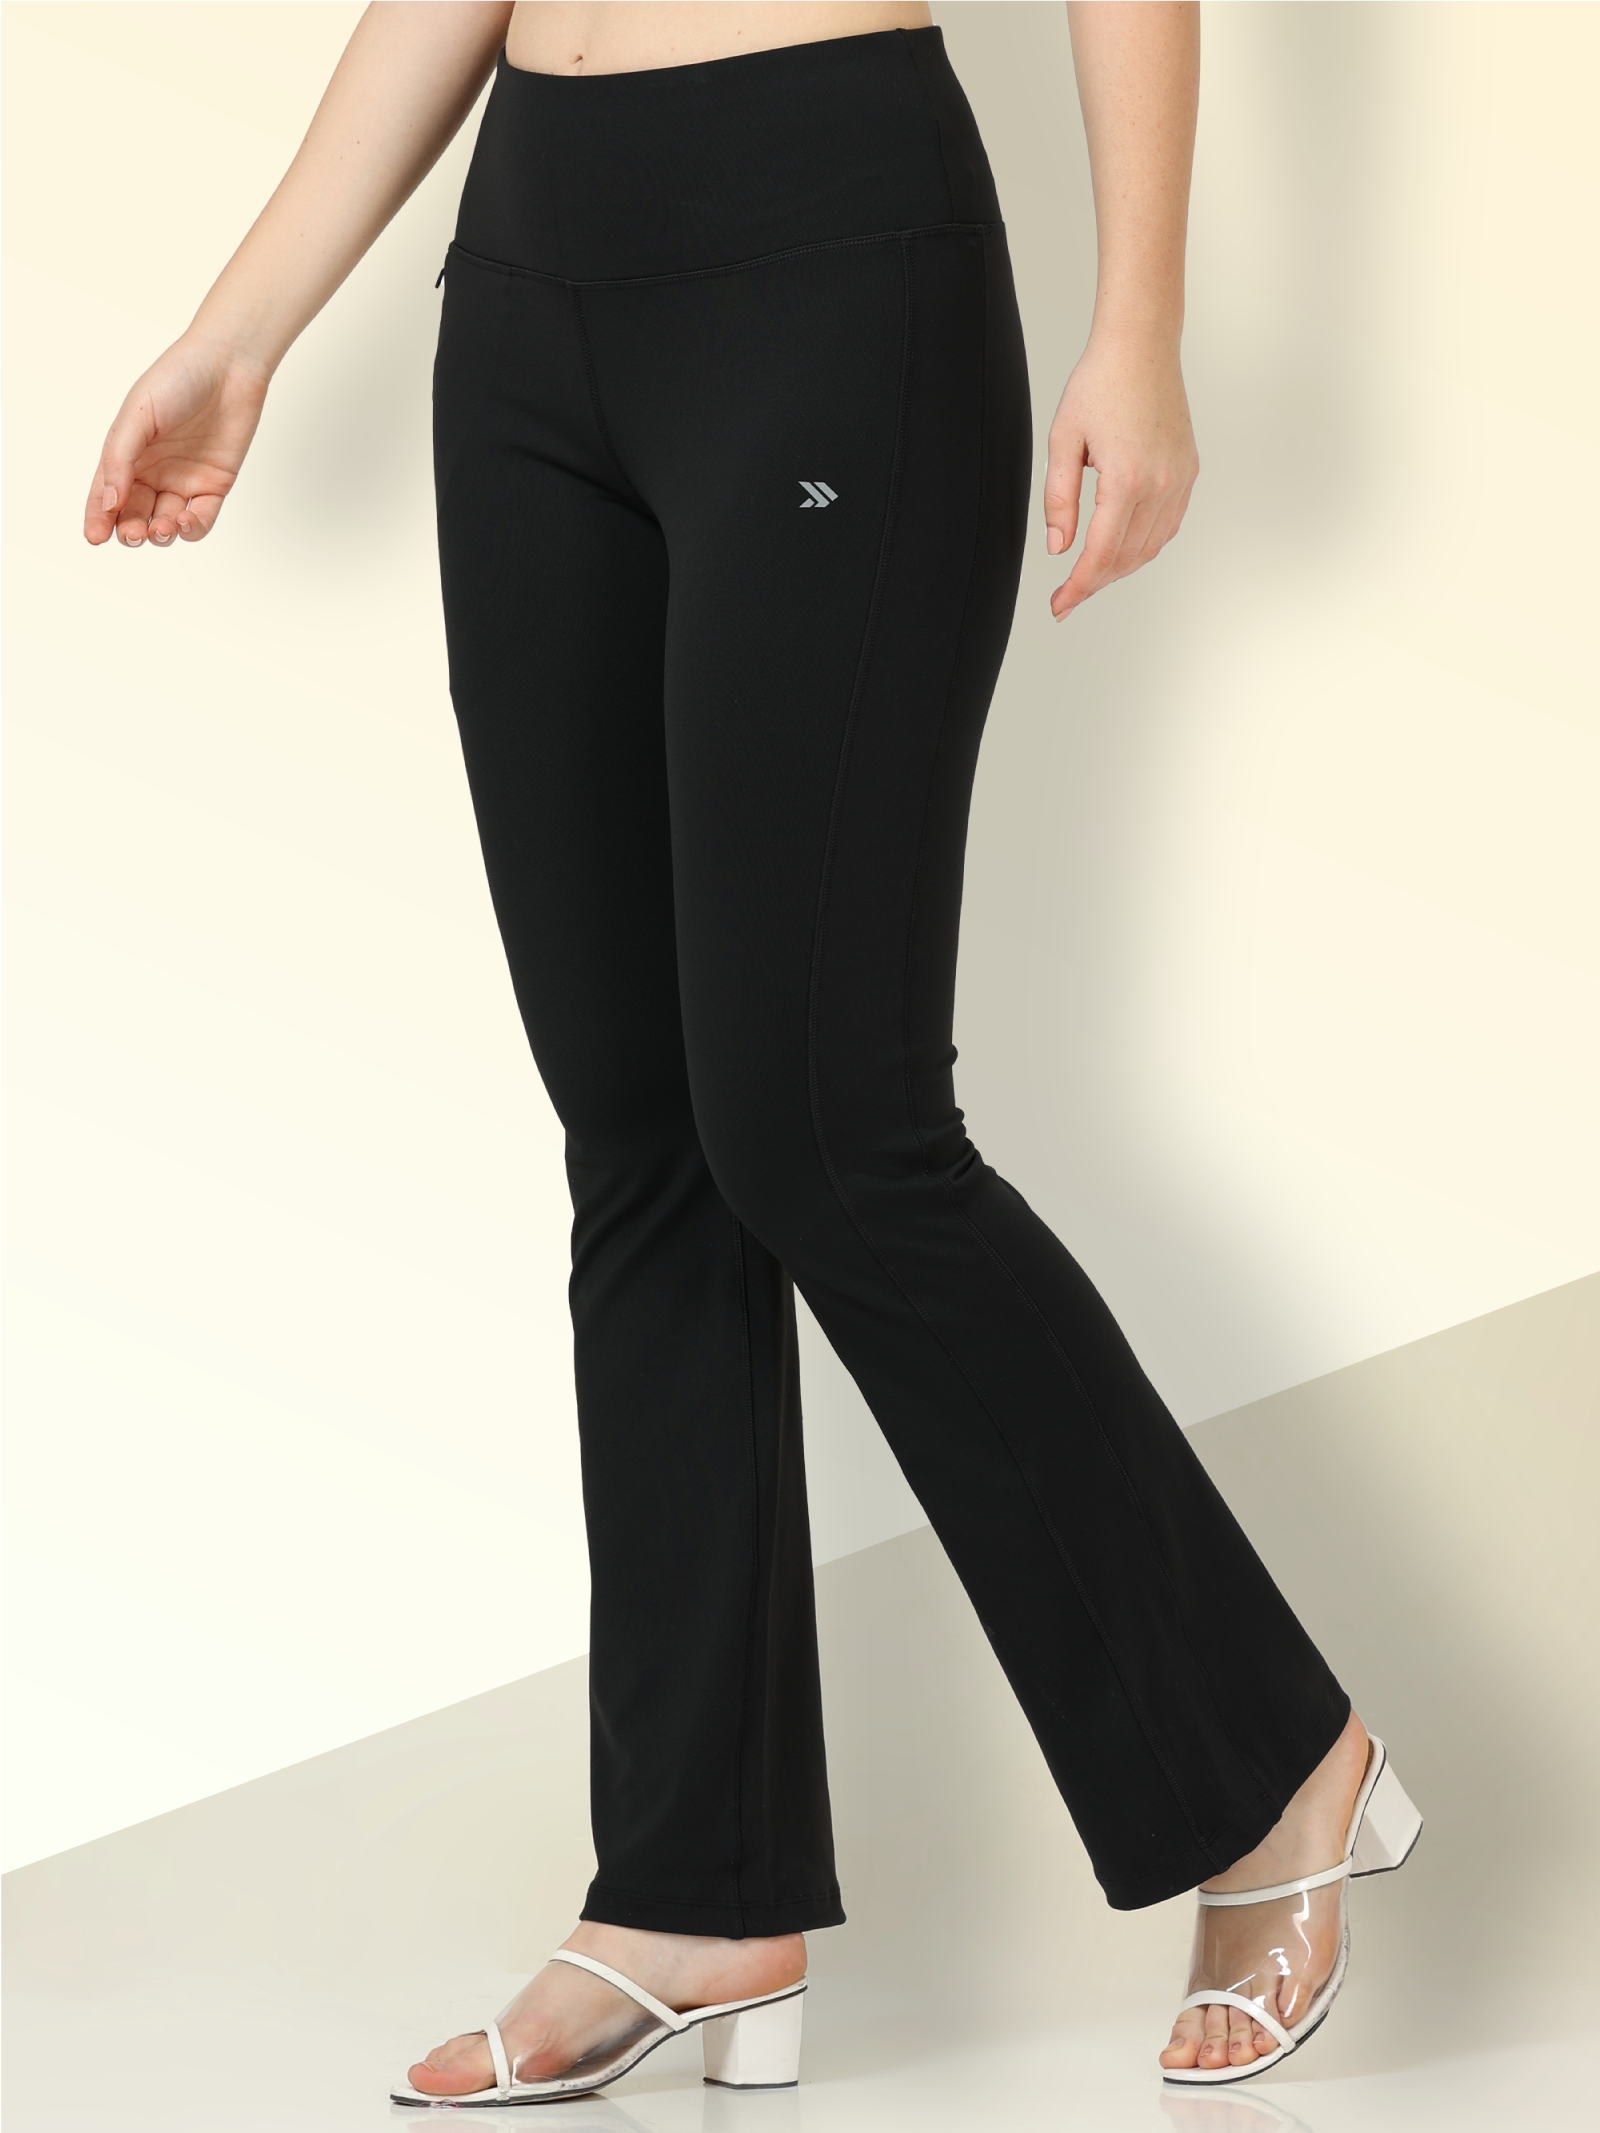 High Waisted Black Flare Pants For Street Walk With Pocket